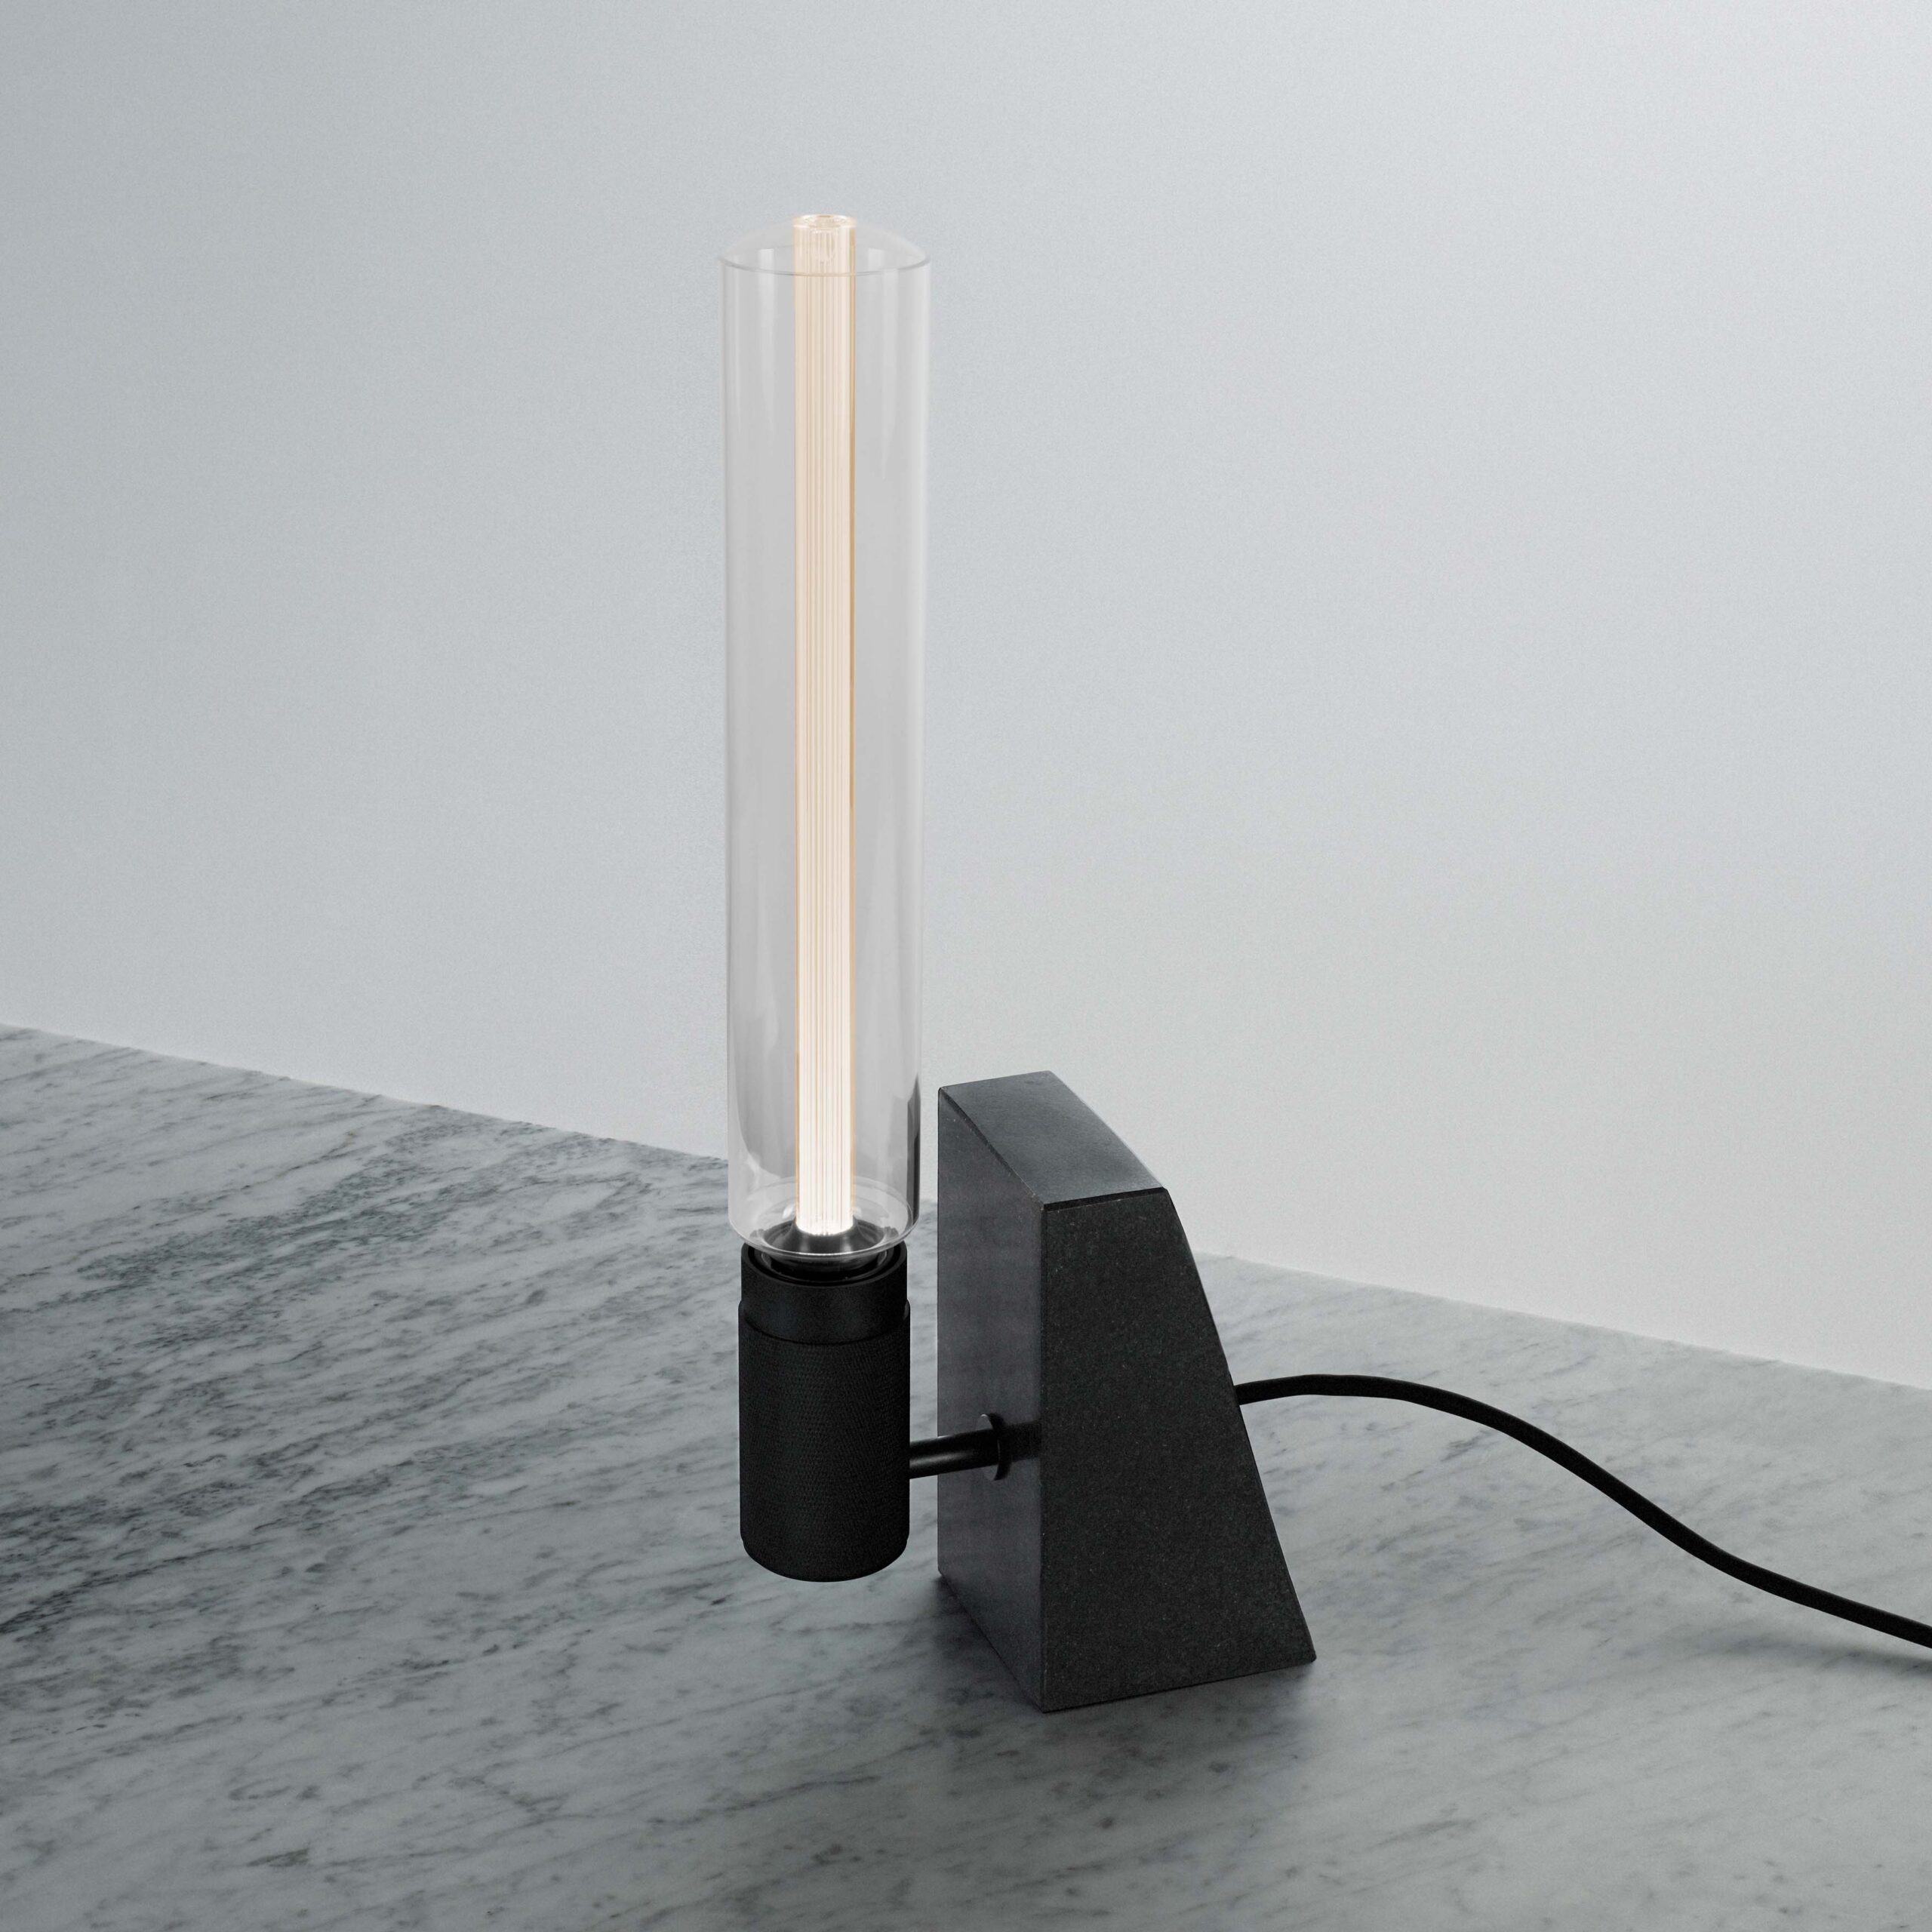 Stoned Table Light Buster Punch, Granite Table Lamp